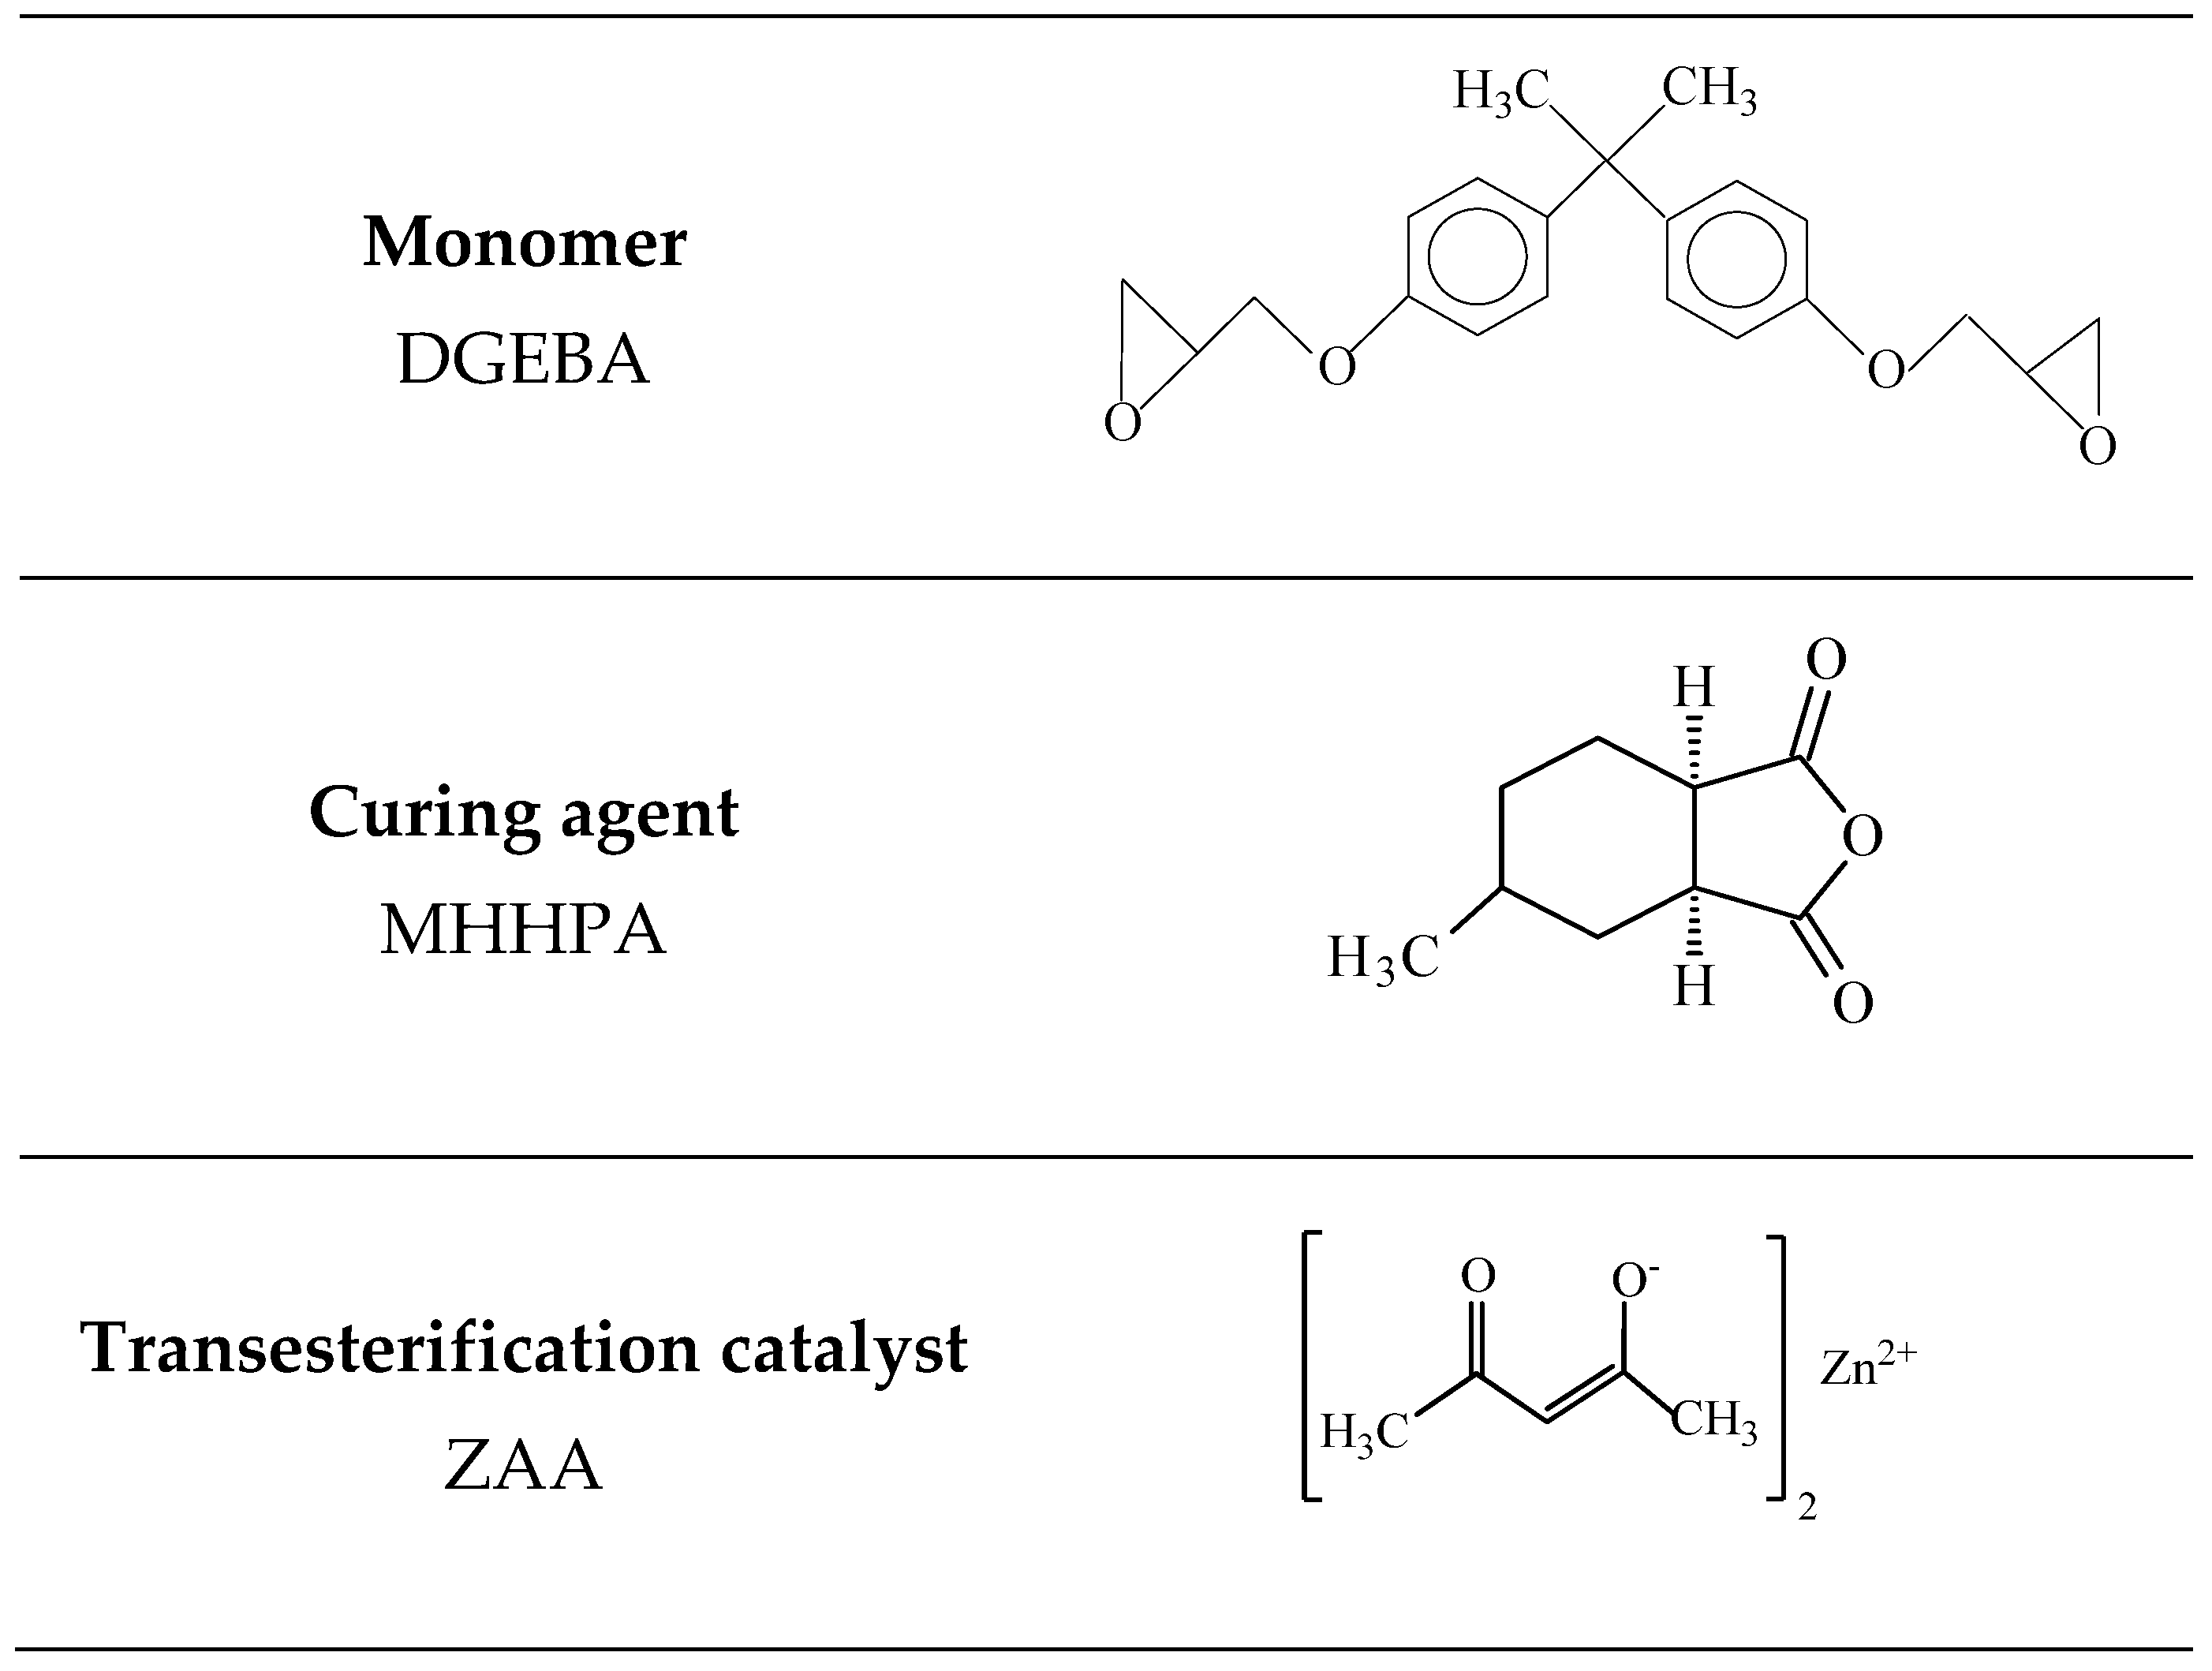 https://pub.mdpi-res.com/polymers/polymers-13-03040/article_deploy/html/images/polymers-13-03040-g001.png?1632359185